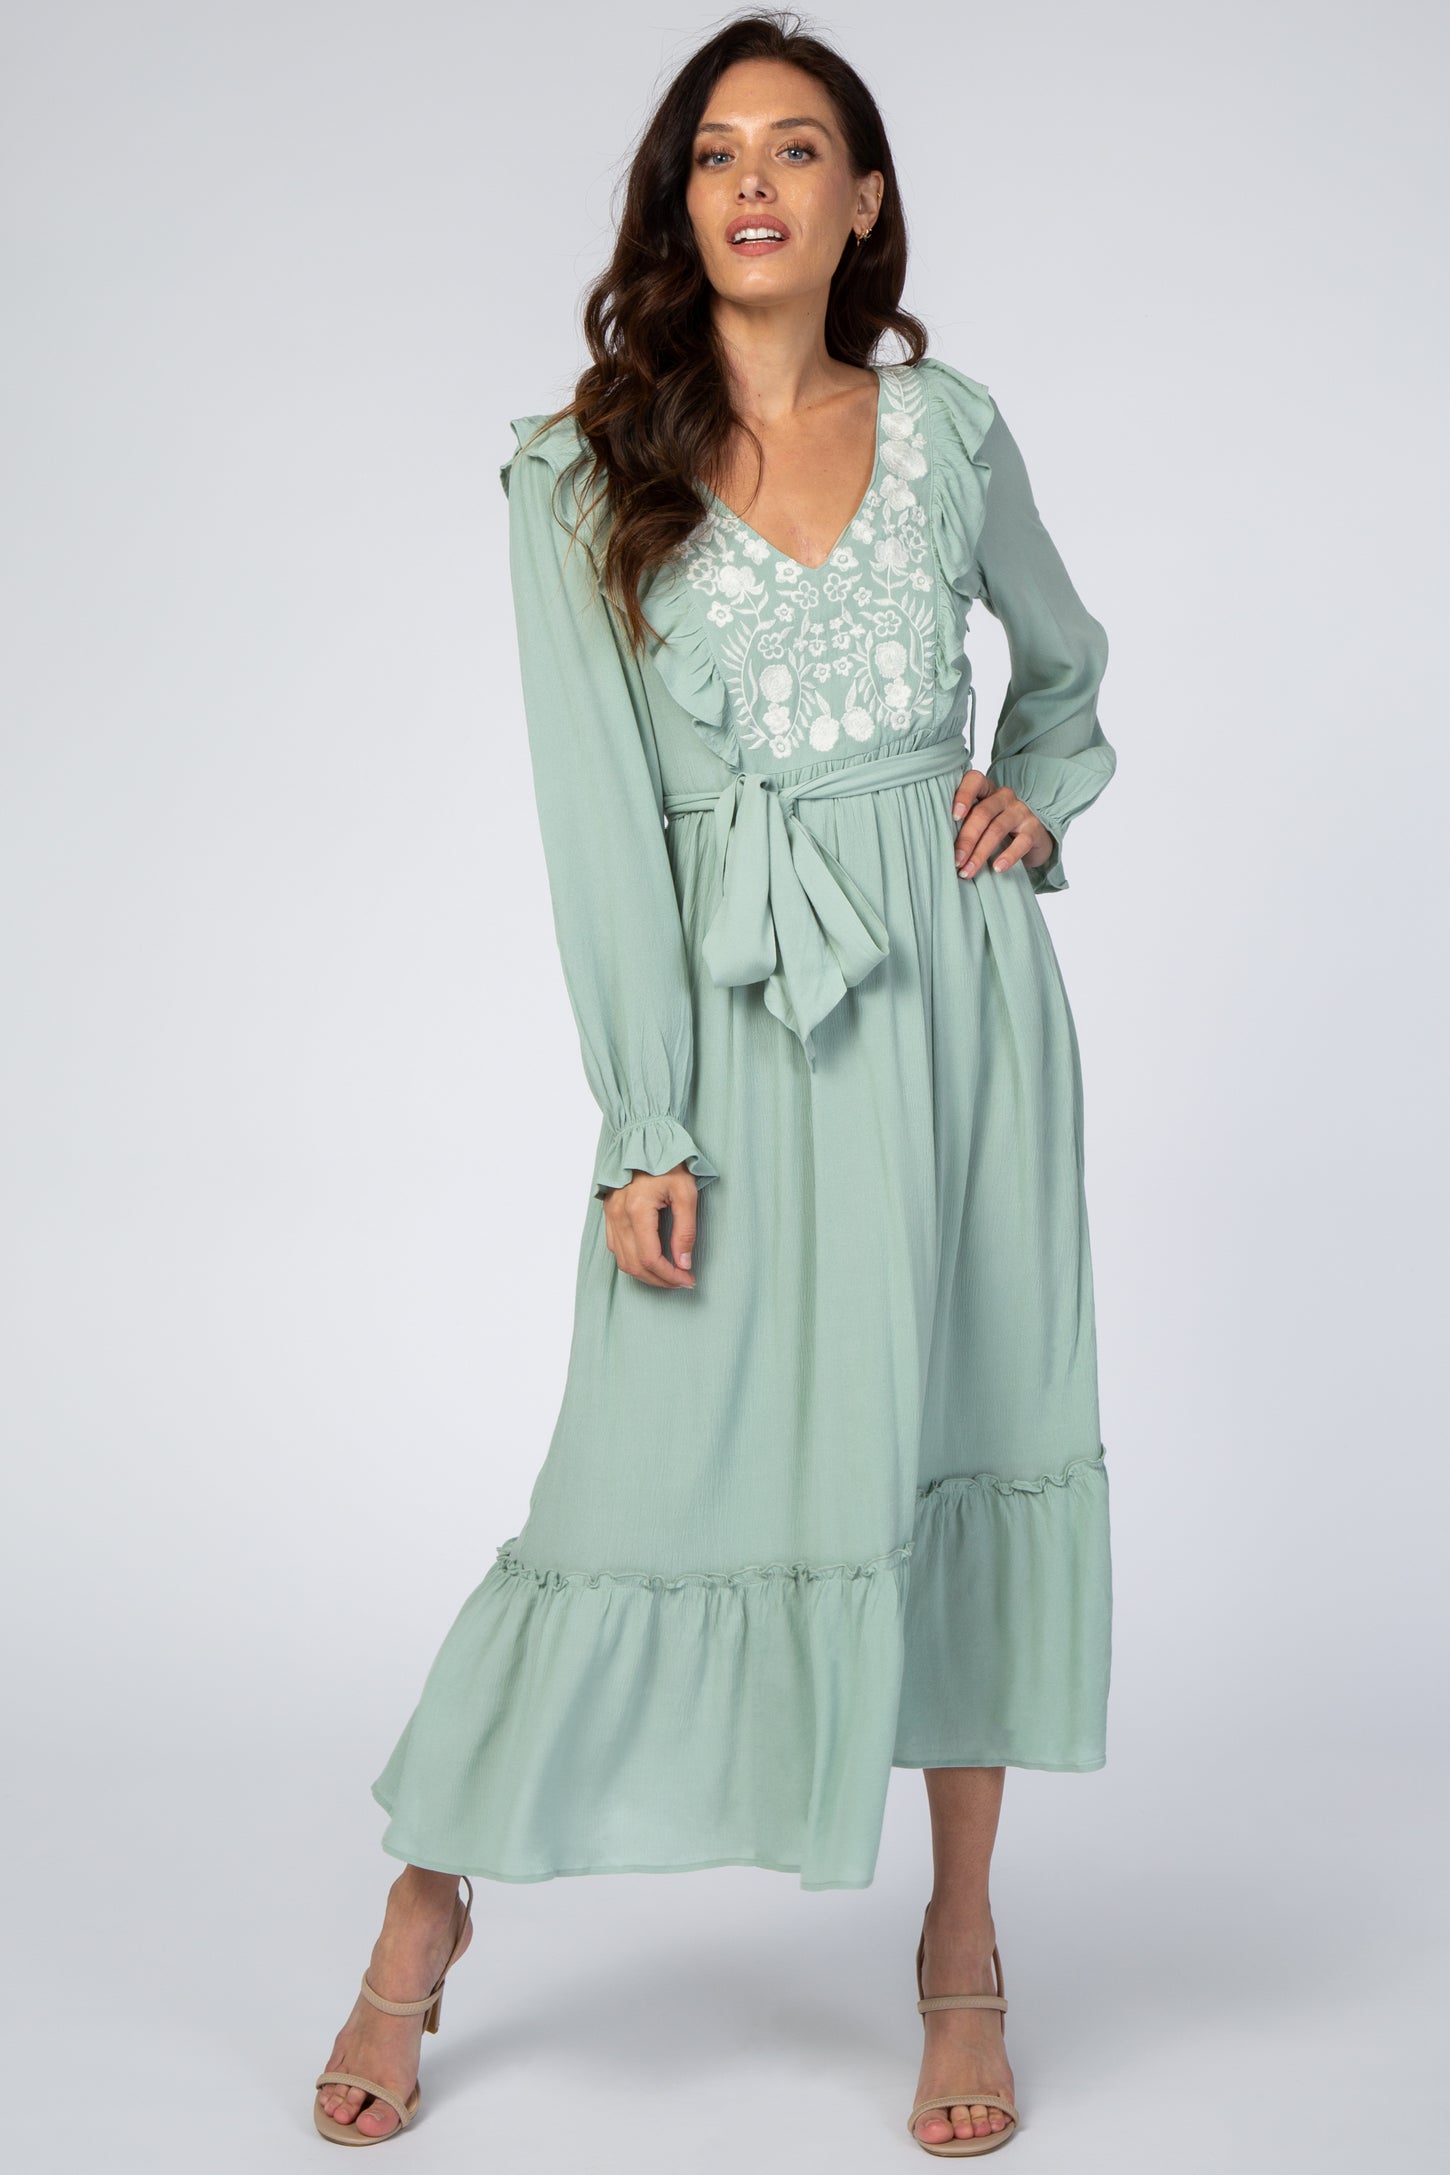 Mint Floral Embroidered Ruffled Midi Dress